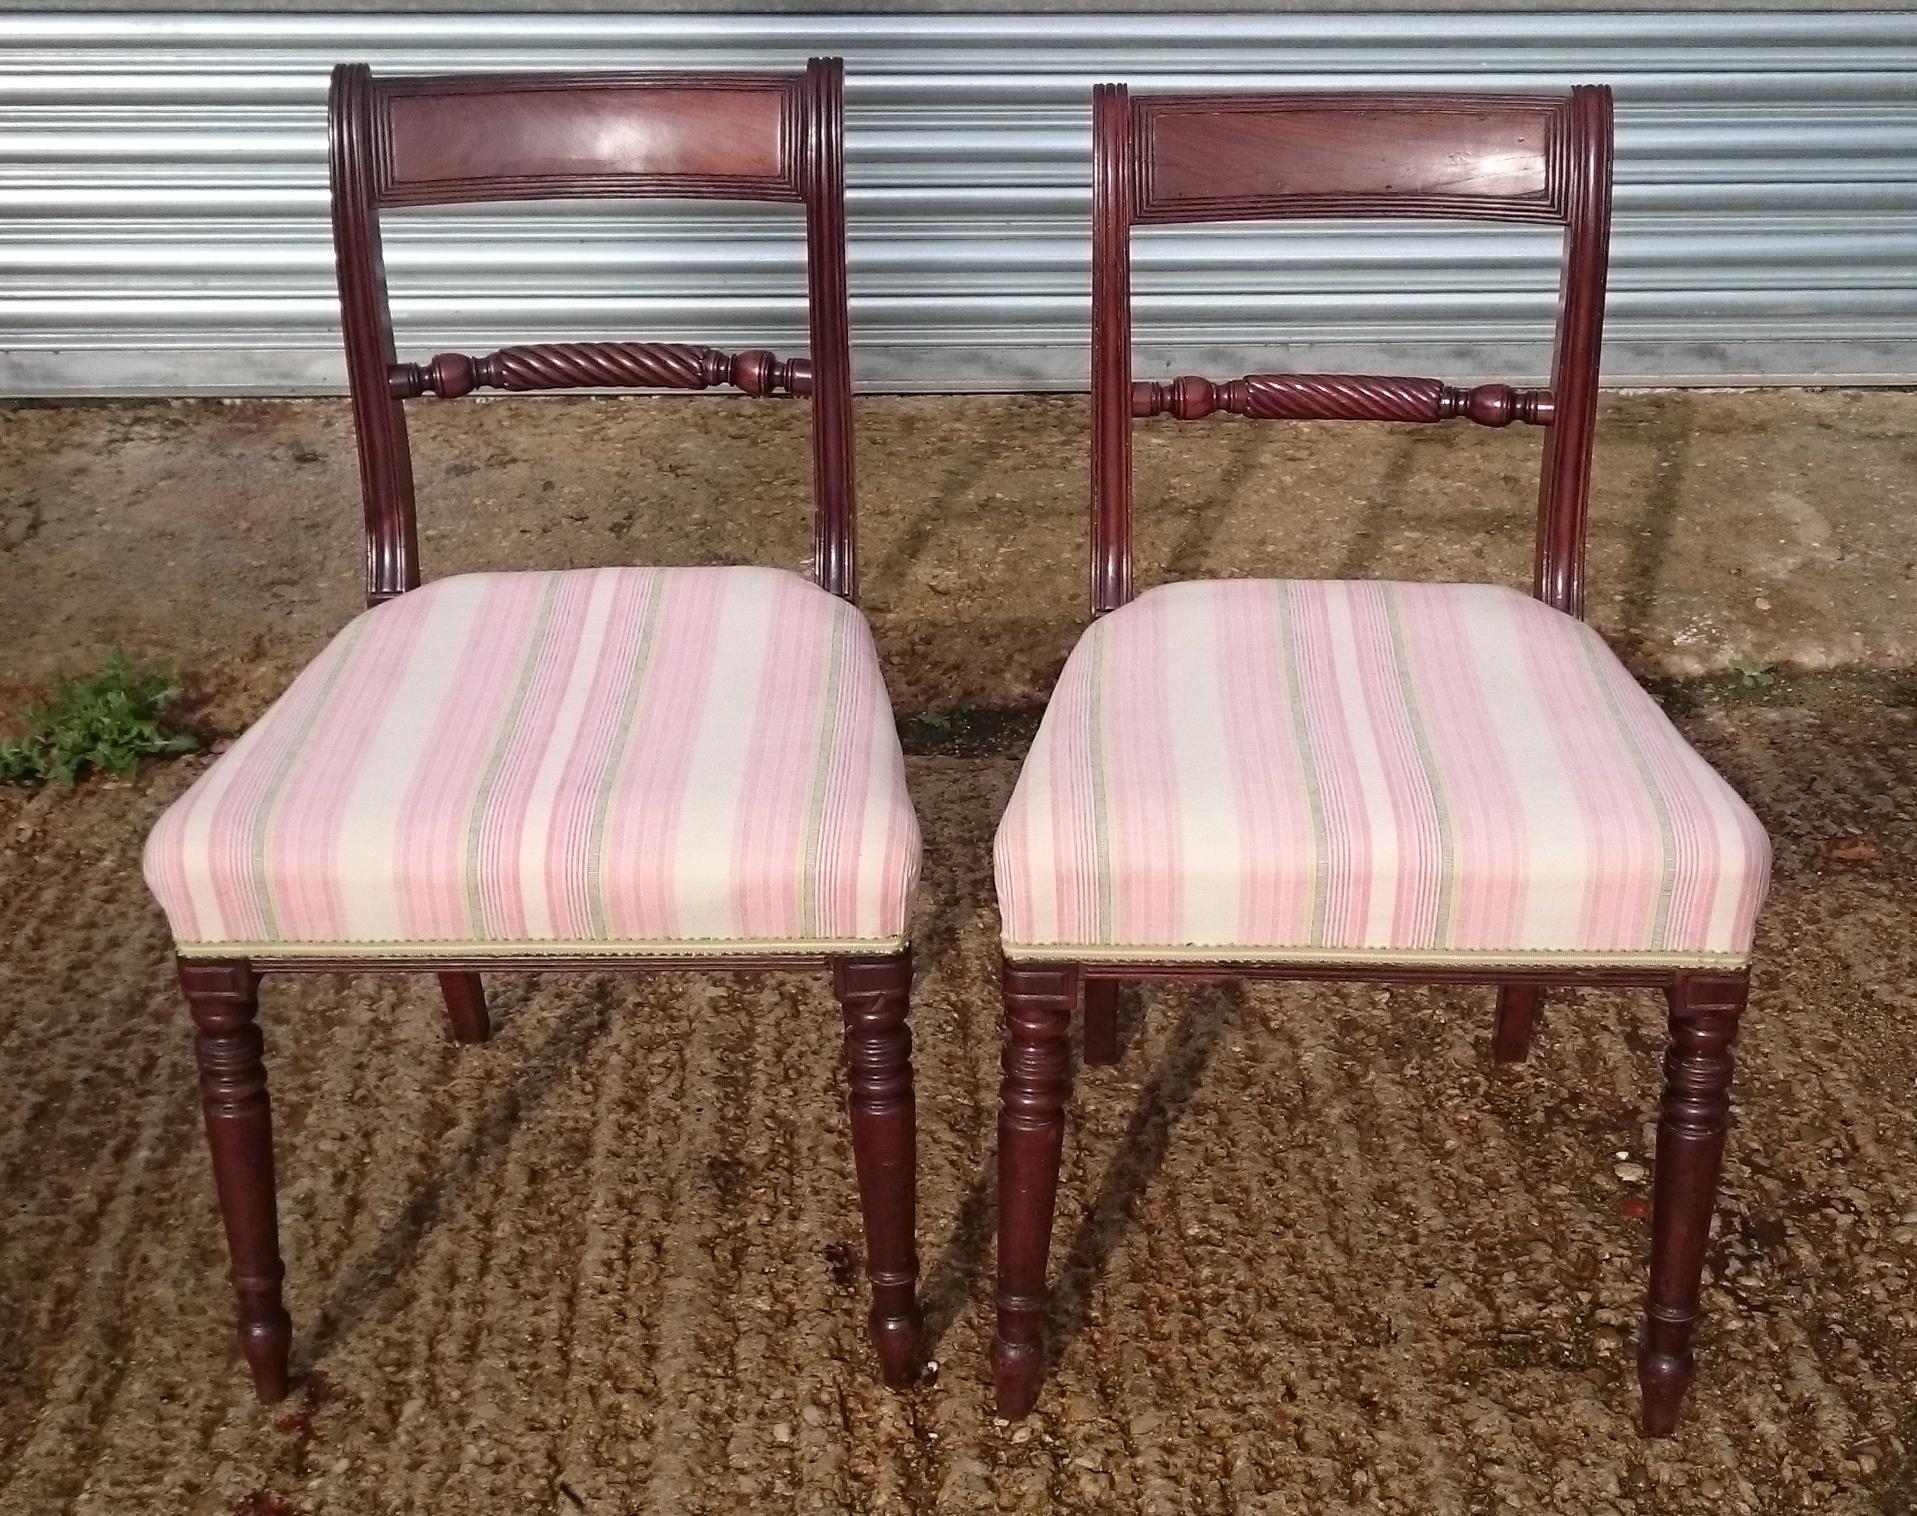 Pair of Early 19th Century Regency Mahogany Antique Dining Chairs (Britisch)